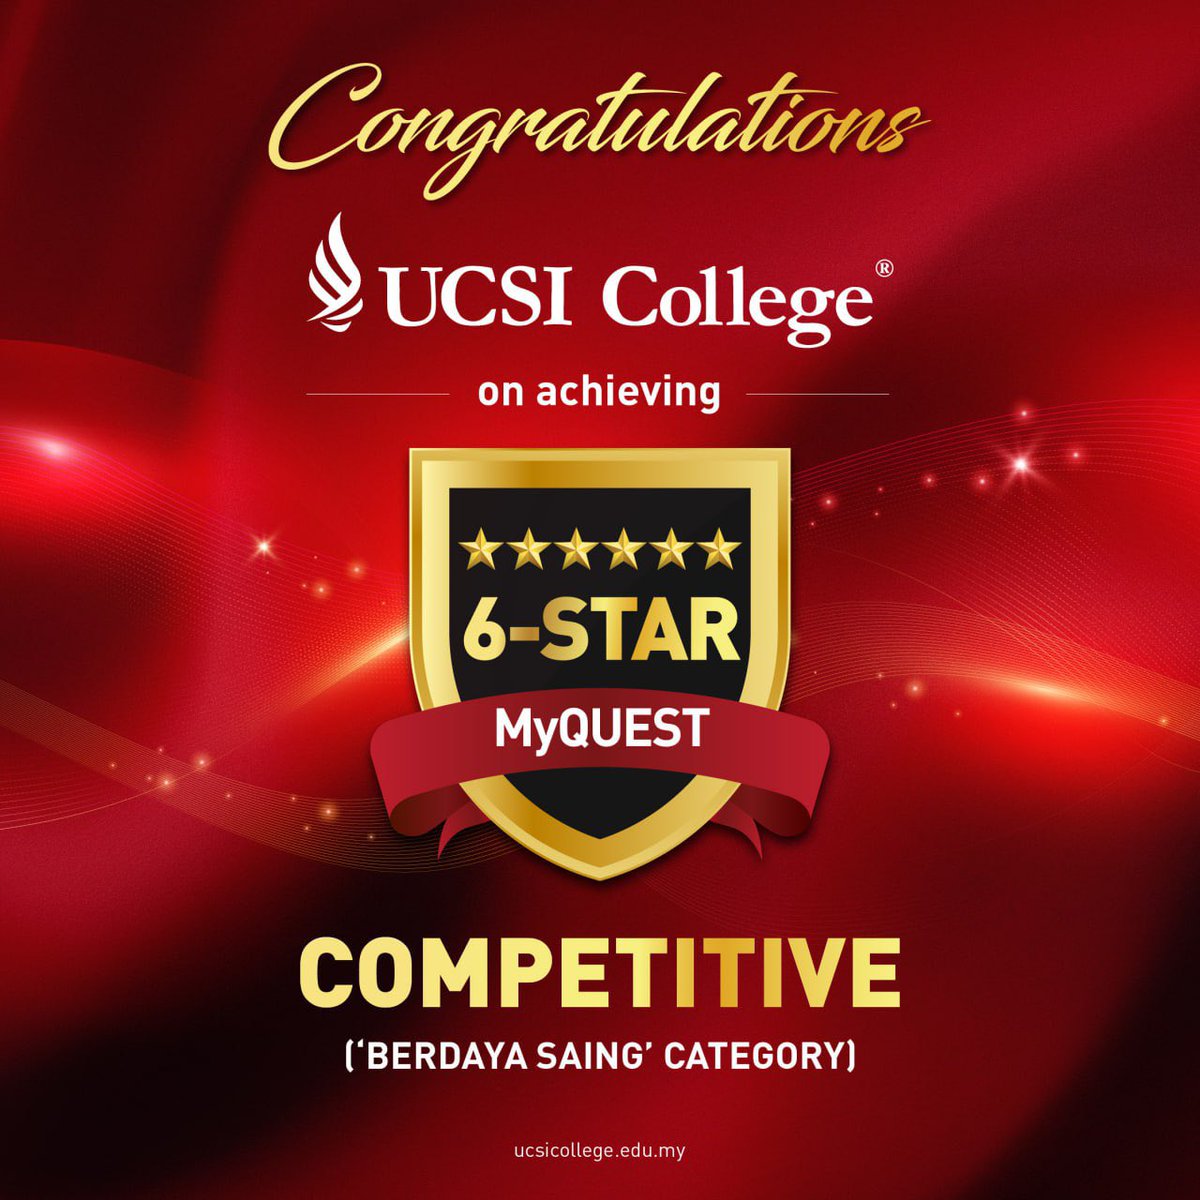 ✨A Proud Moment for UCSI College! ✨

We're thrilled to share the remarkable news: UCSI College has achieved a stellar 6-star MyQuest rating in the 'Berdaya Saing' category. 

#ucsi #UCSICollege #MyQUEST #BerdayaSaing #HigherEducation